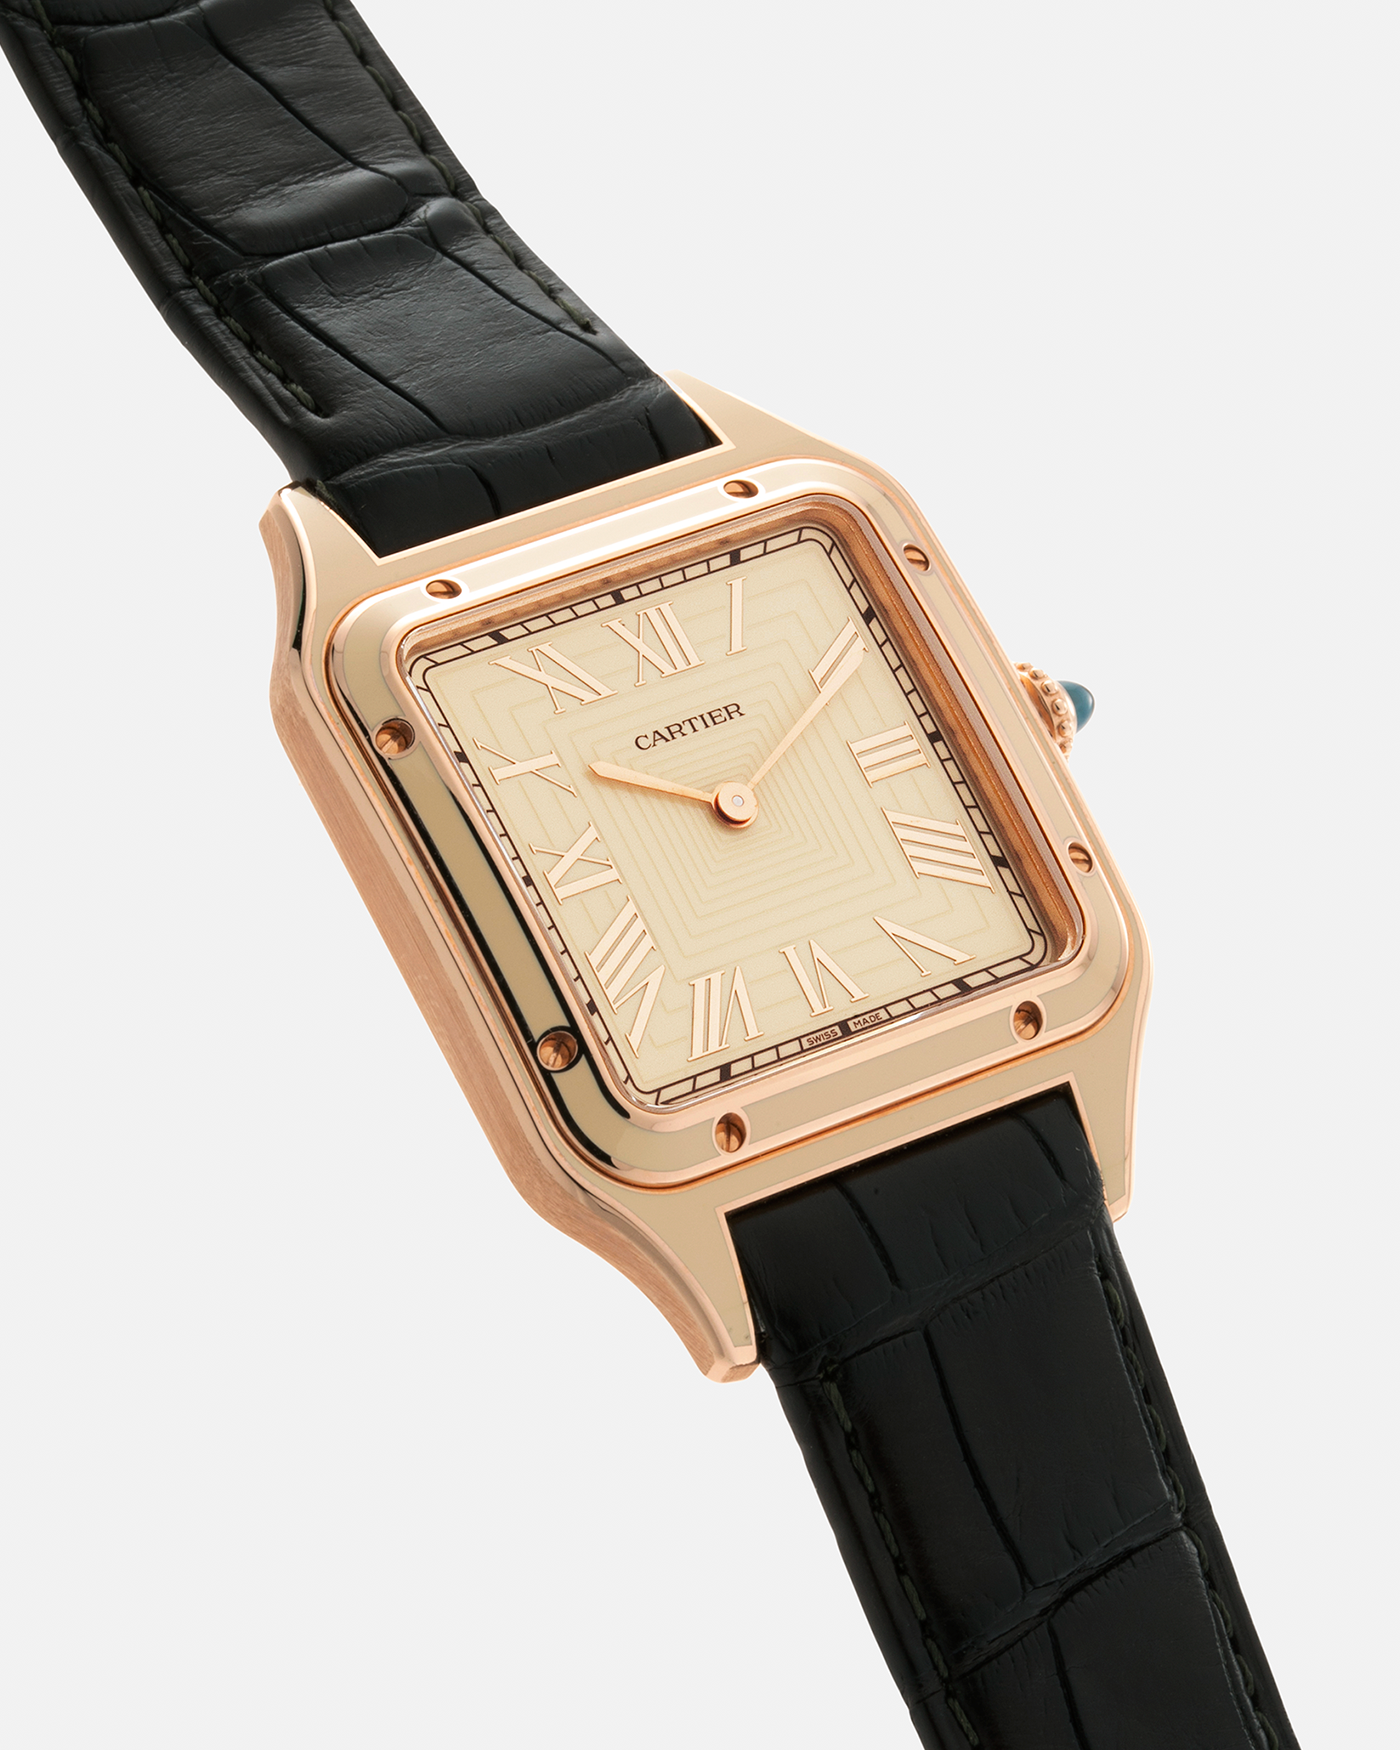 Brand: Cartier Year: 2022 Model: Santos-Dumont Large Material: 18-carat Rose Gold, Beige Lacquer Movement: Cartier Cal. 430 MC, Manual-Winding Case Diameter: 43.5mm x 31.4mm Bracelet / Strap: Cartier Black Alligator Leather Strap with Signed 18-carat Rose Gold Tang Buckle